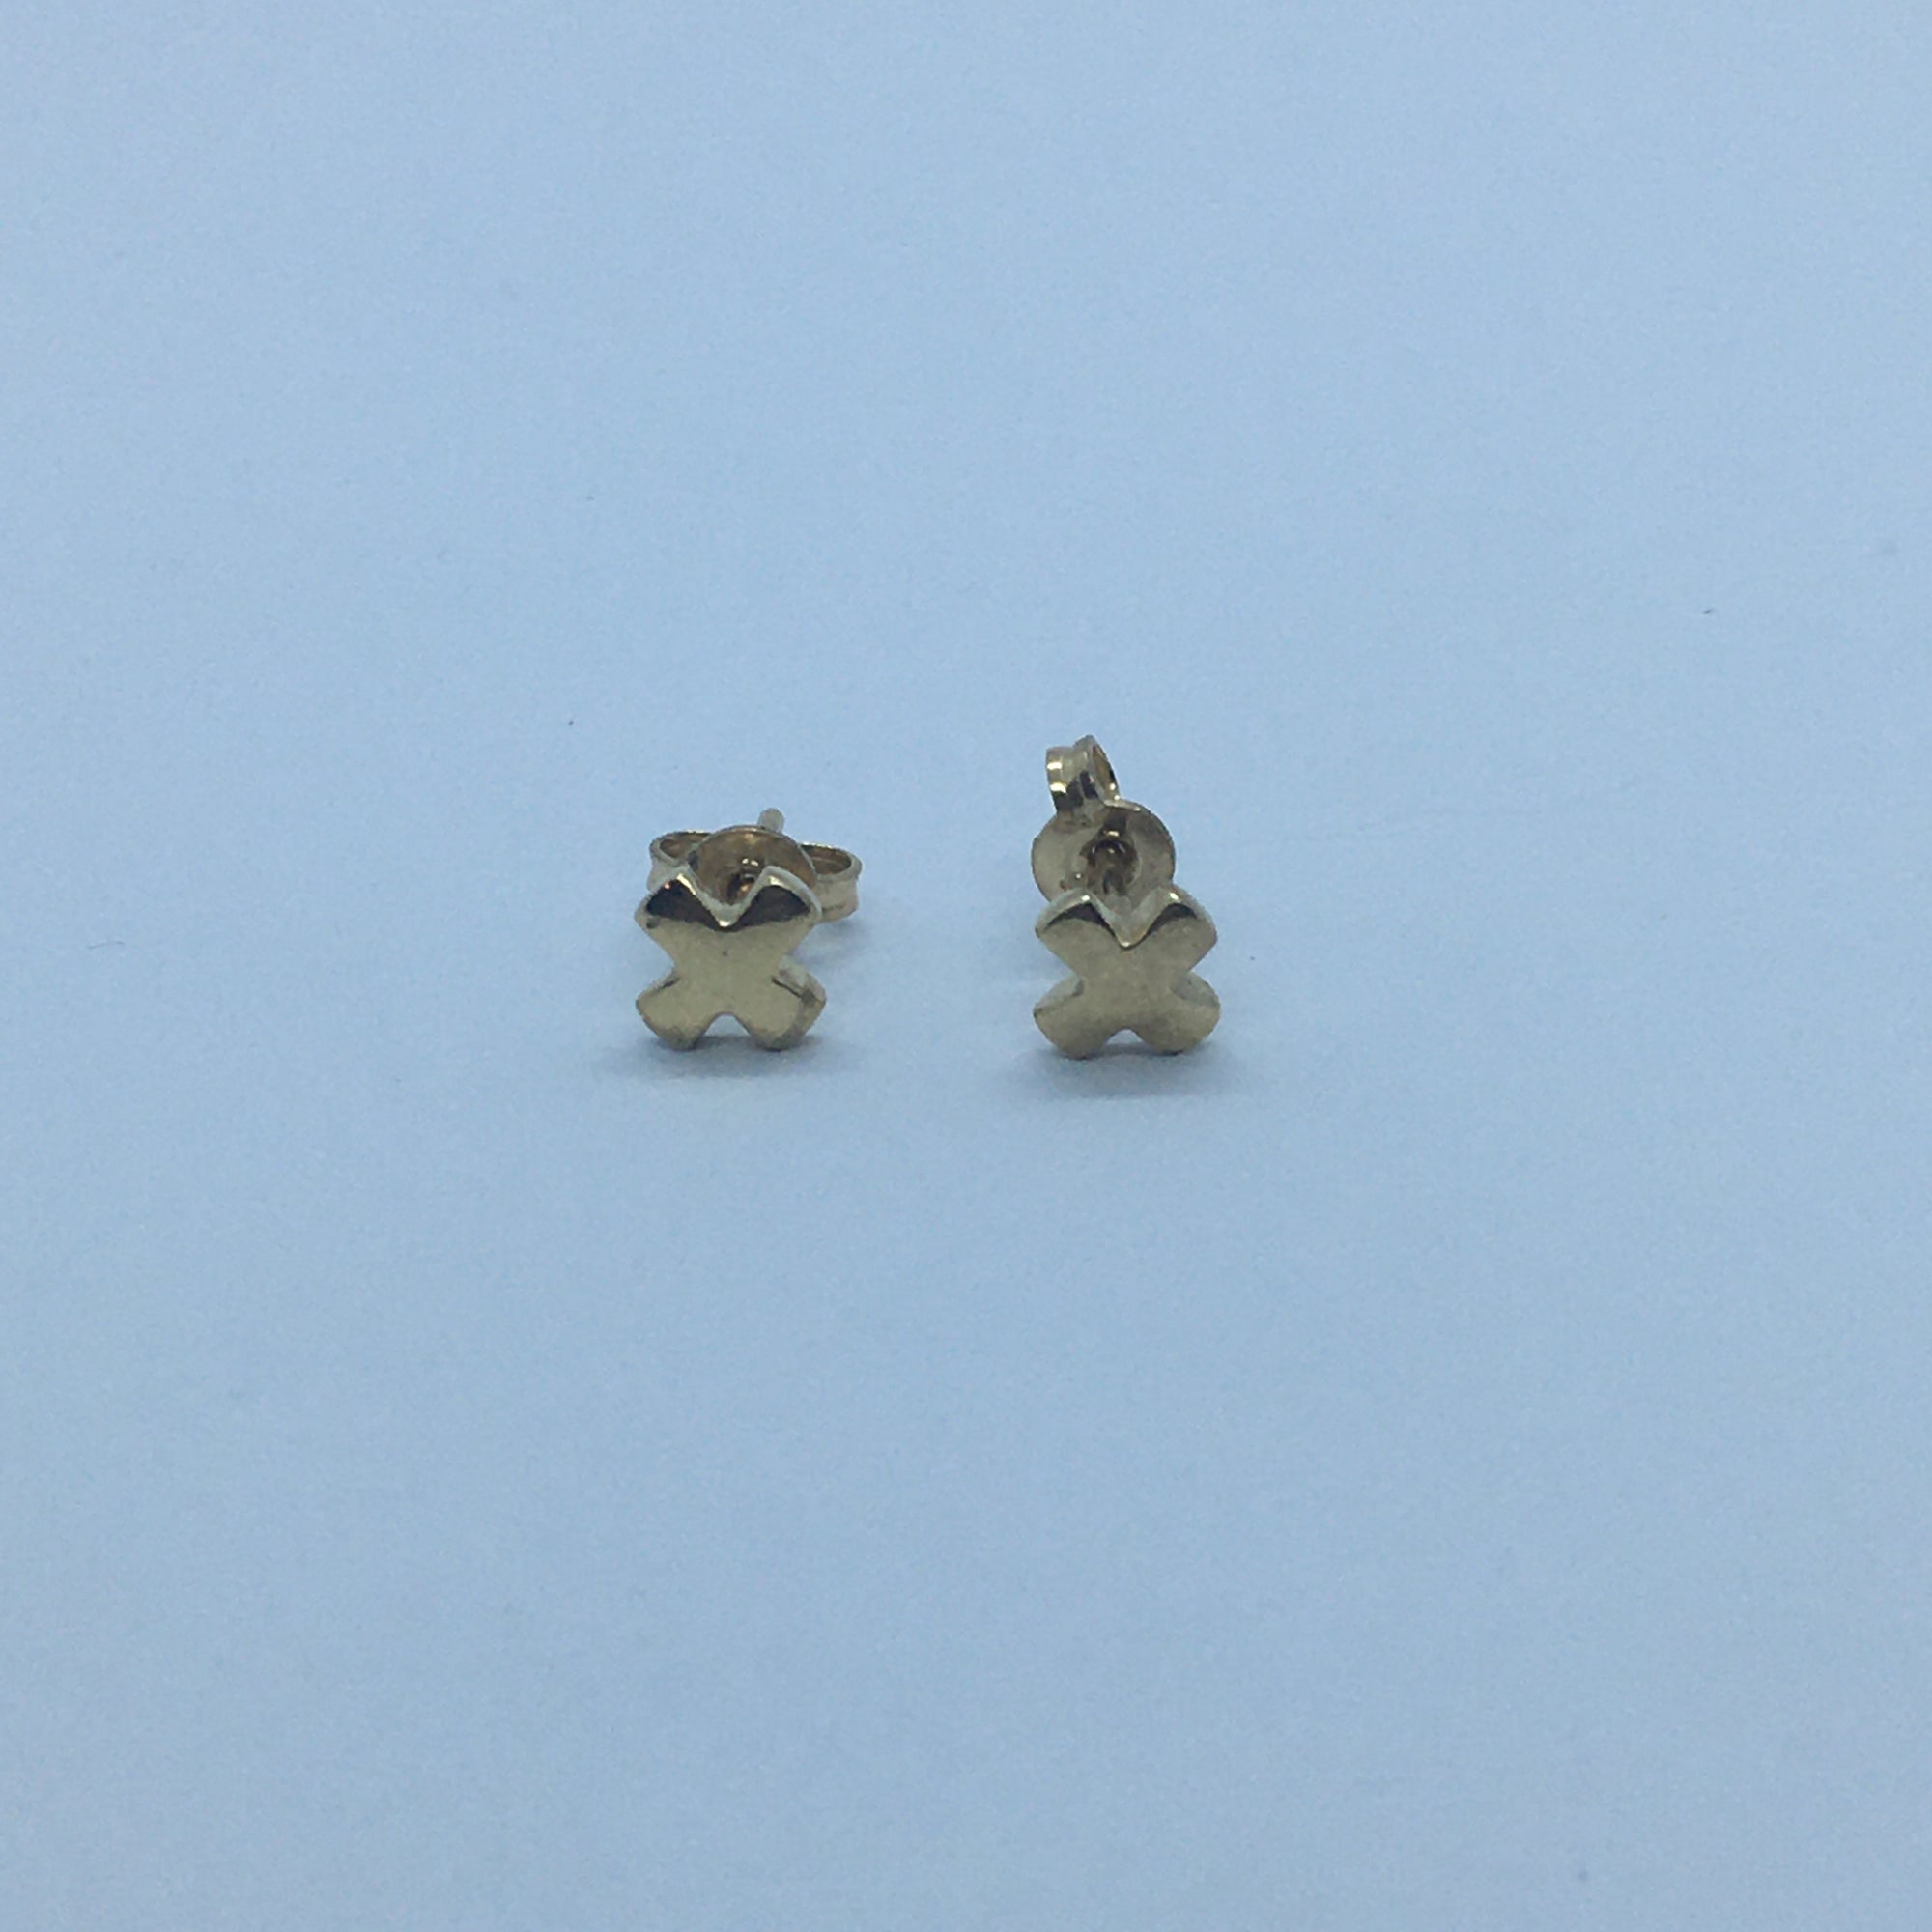 Kiss Stud Earrings - Gold Plated